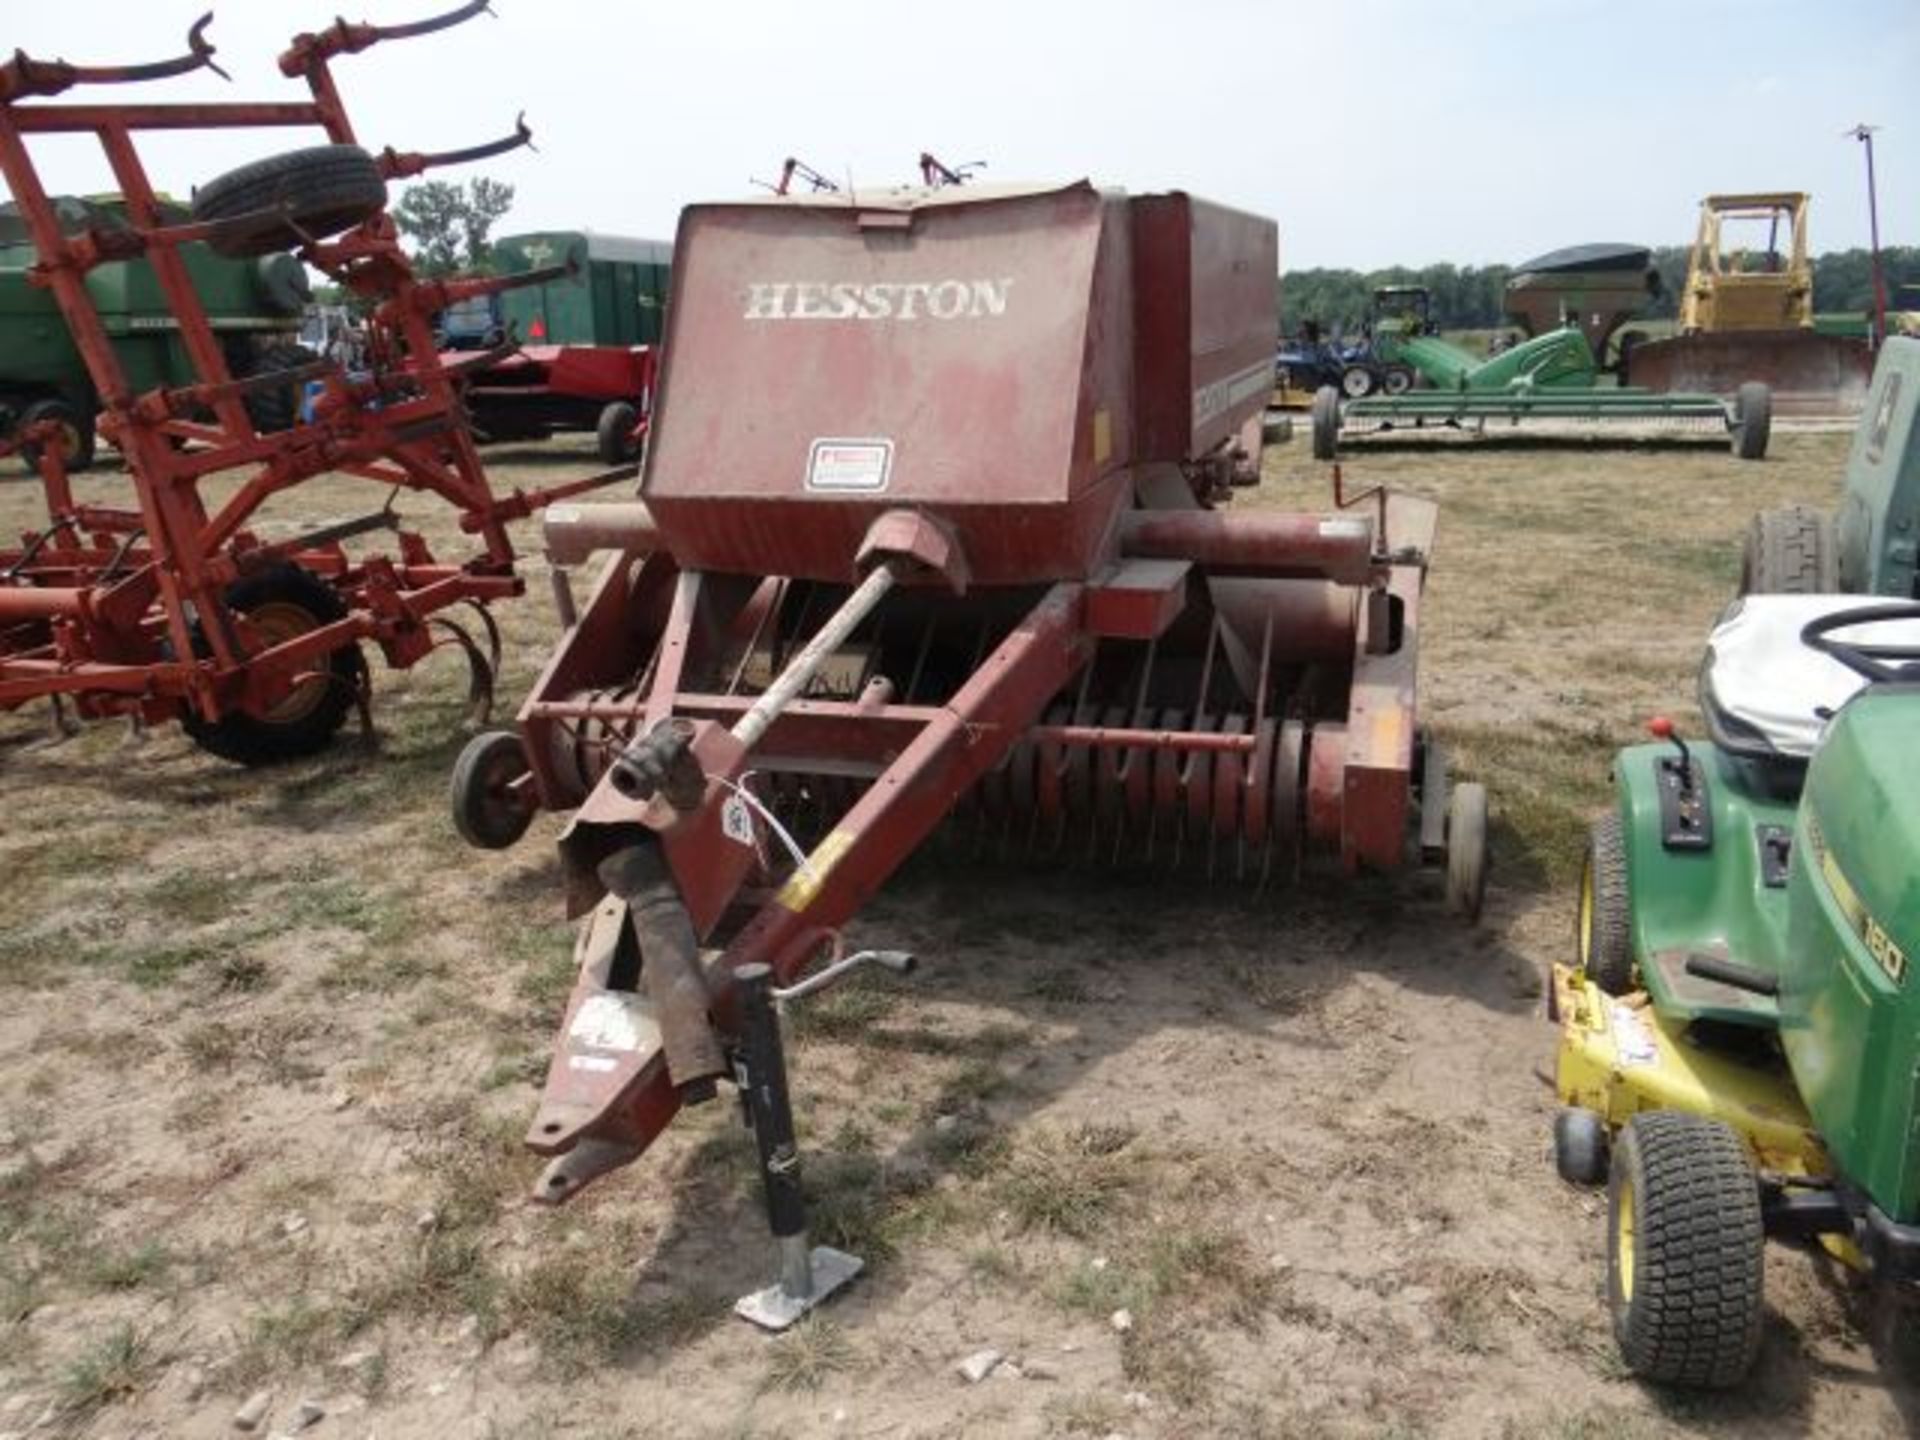 Hesston 4600 Inline Square Baler 540 PTO, Small Bales, Twine Tie, Manual in the Shed